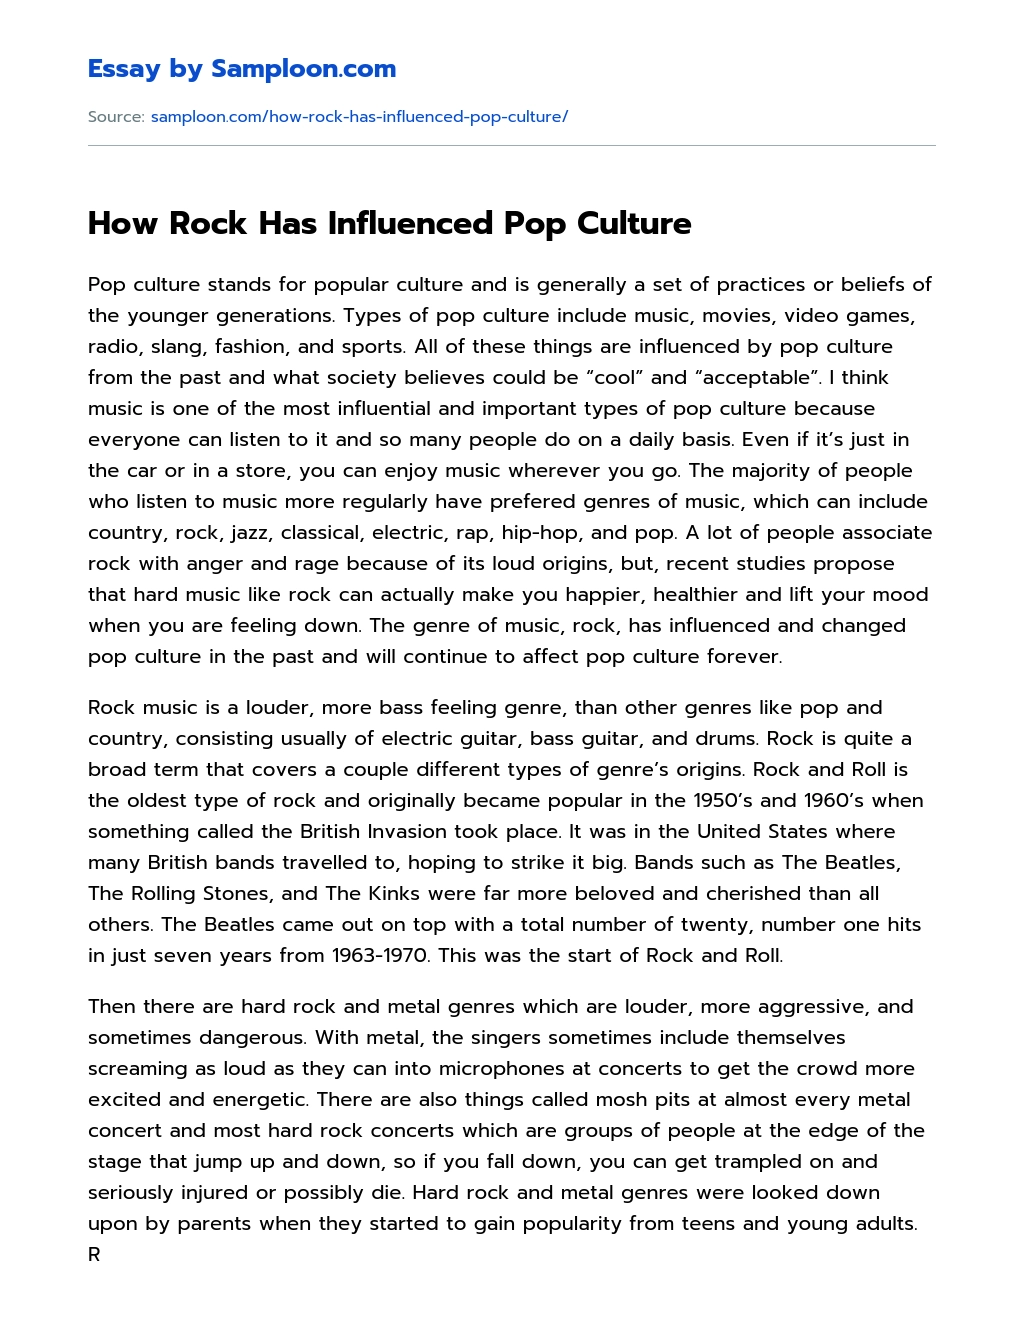 How Rock Has Influenced Pop Culture Character Analysis essay